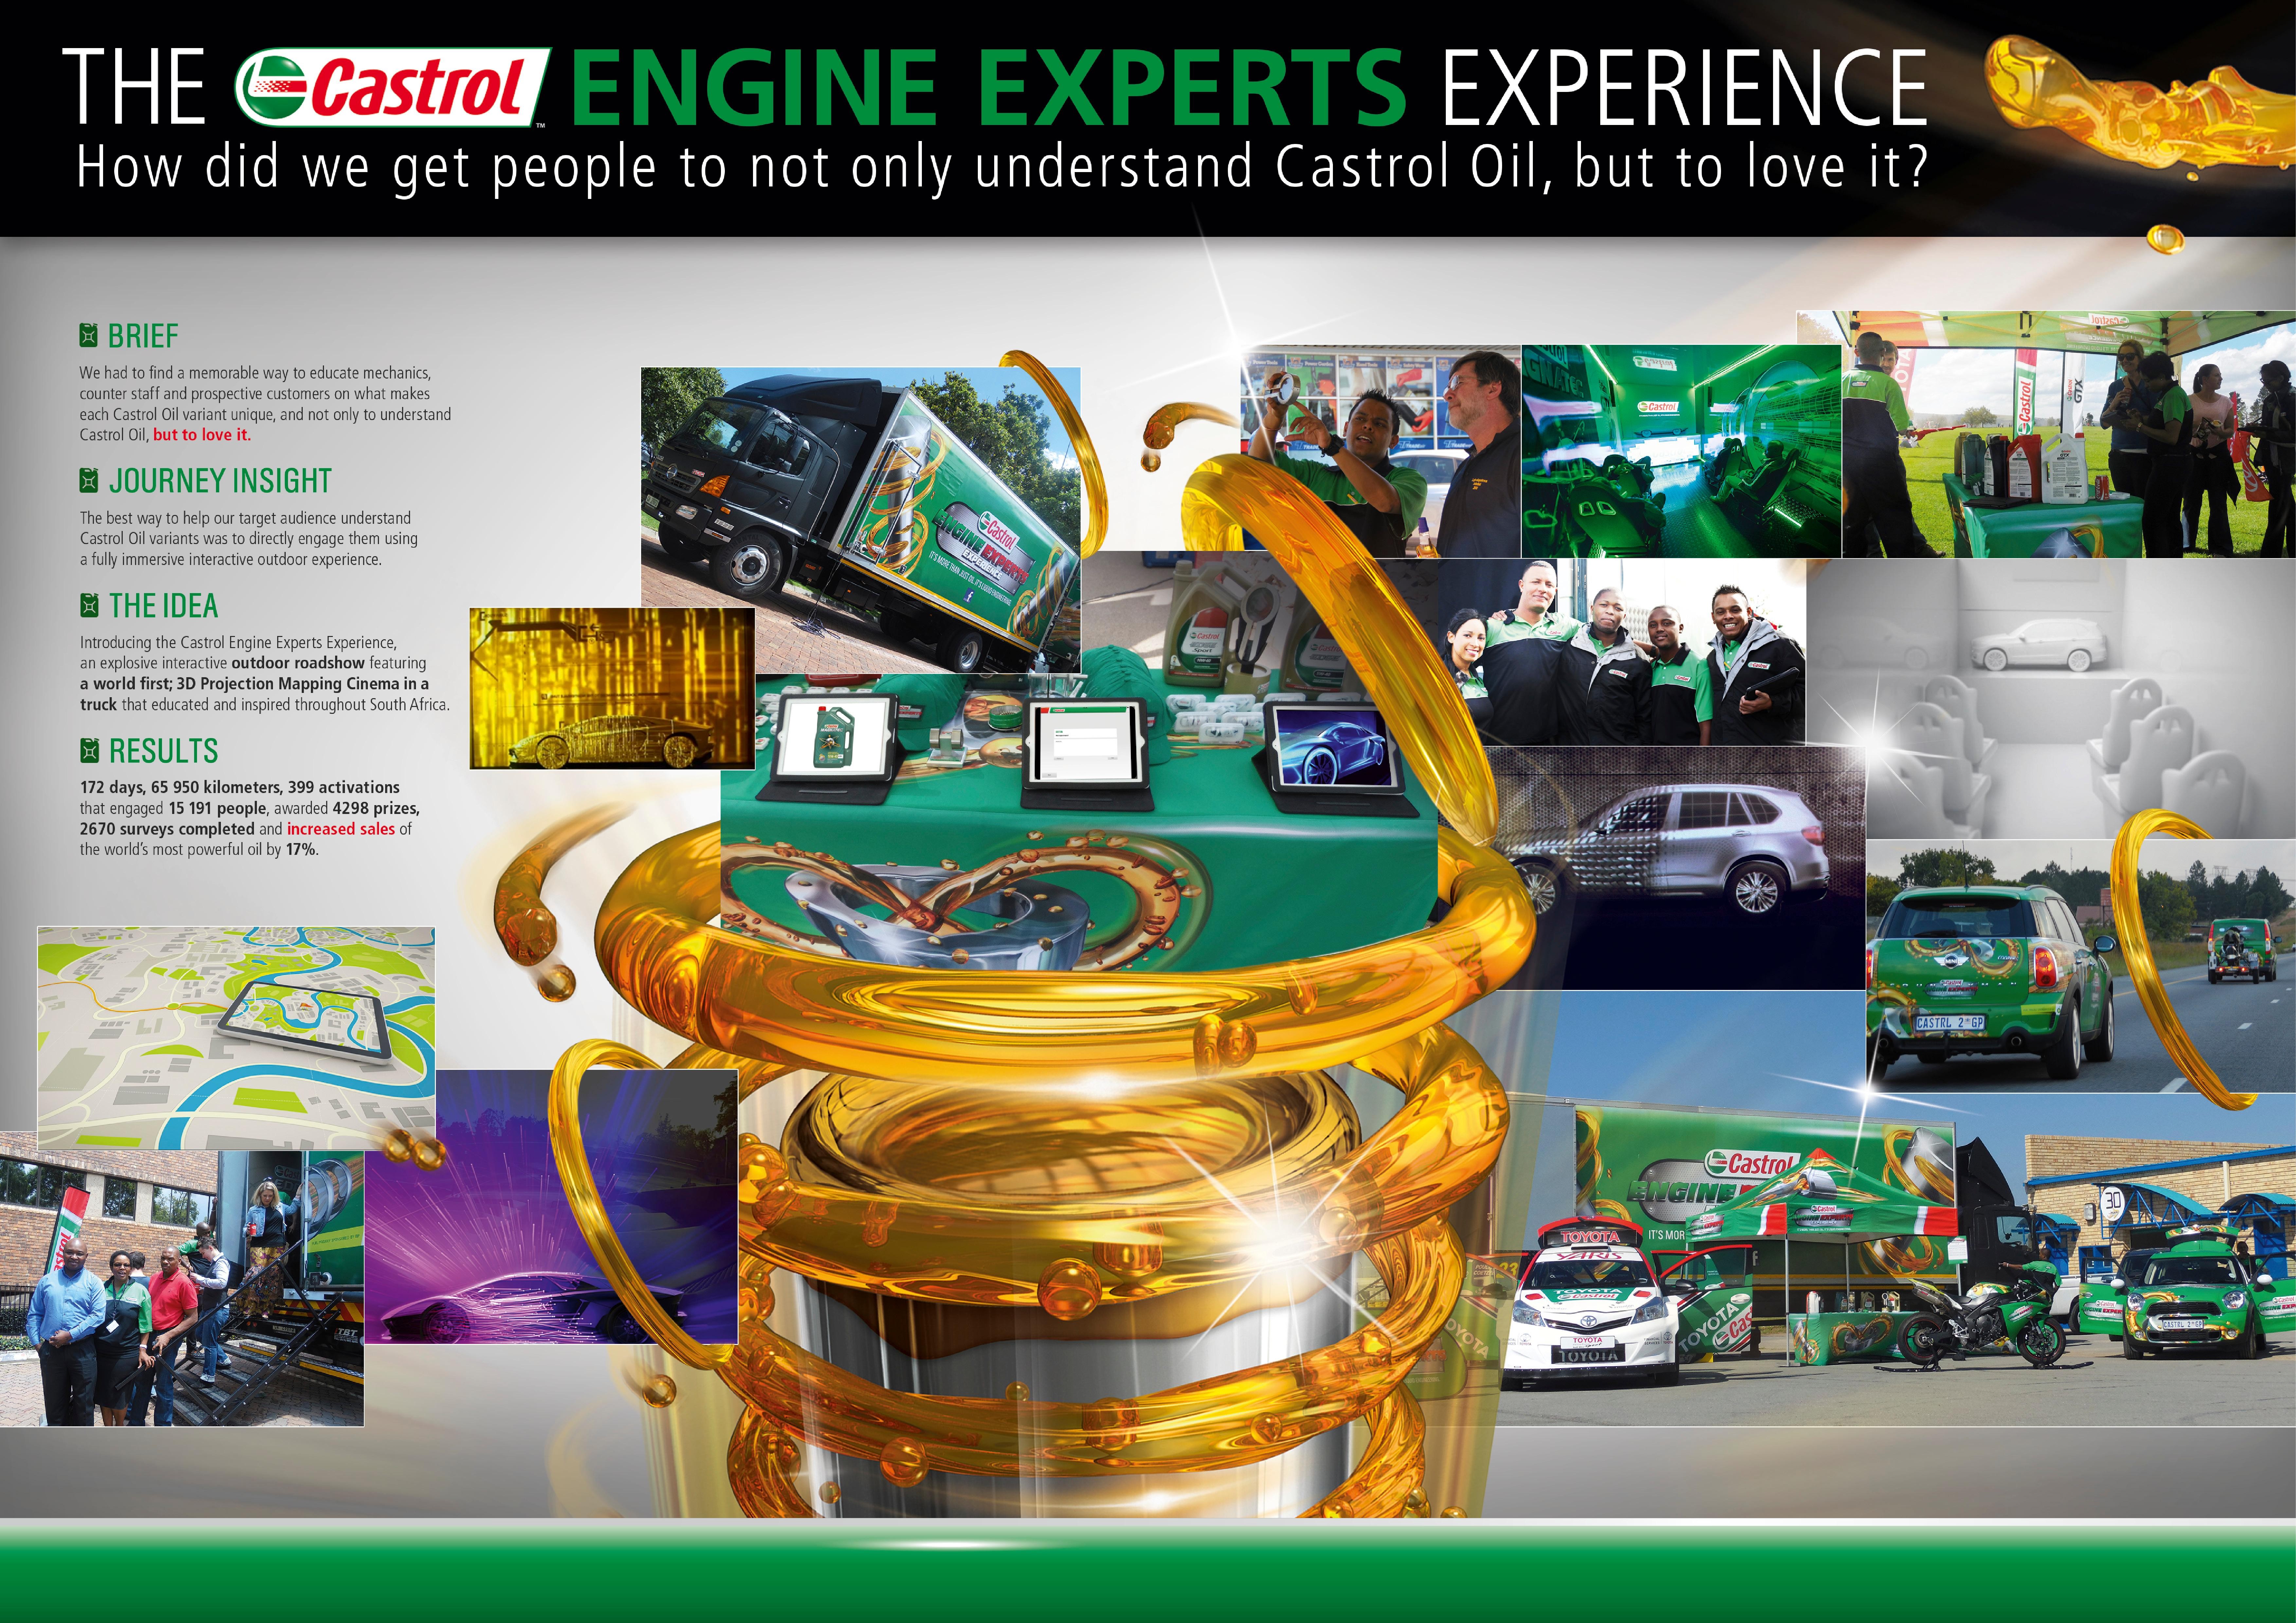 THE ENGINE EXPERTS EXPERIENCE